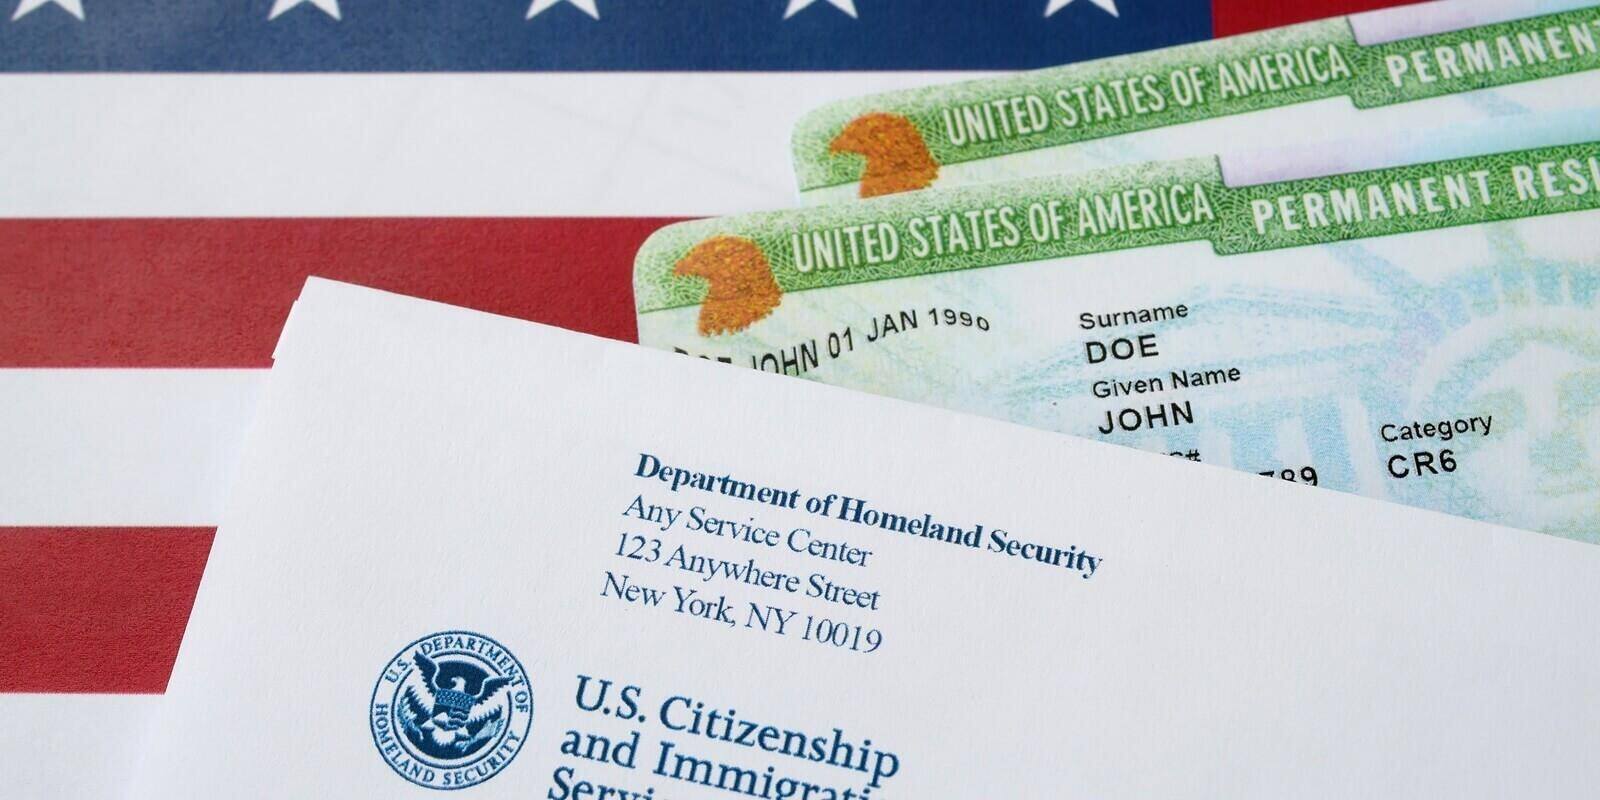 united states permanent resident green cards from dv-lottery lies on United States flag with envelope from department of homeland security